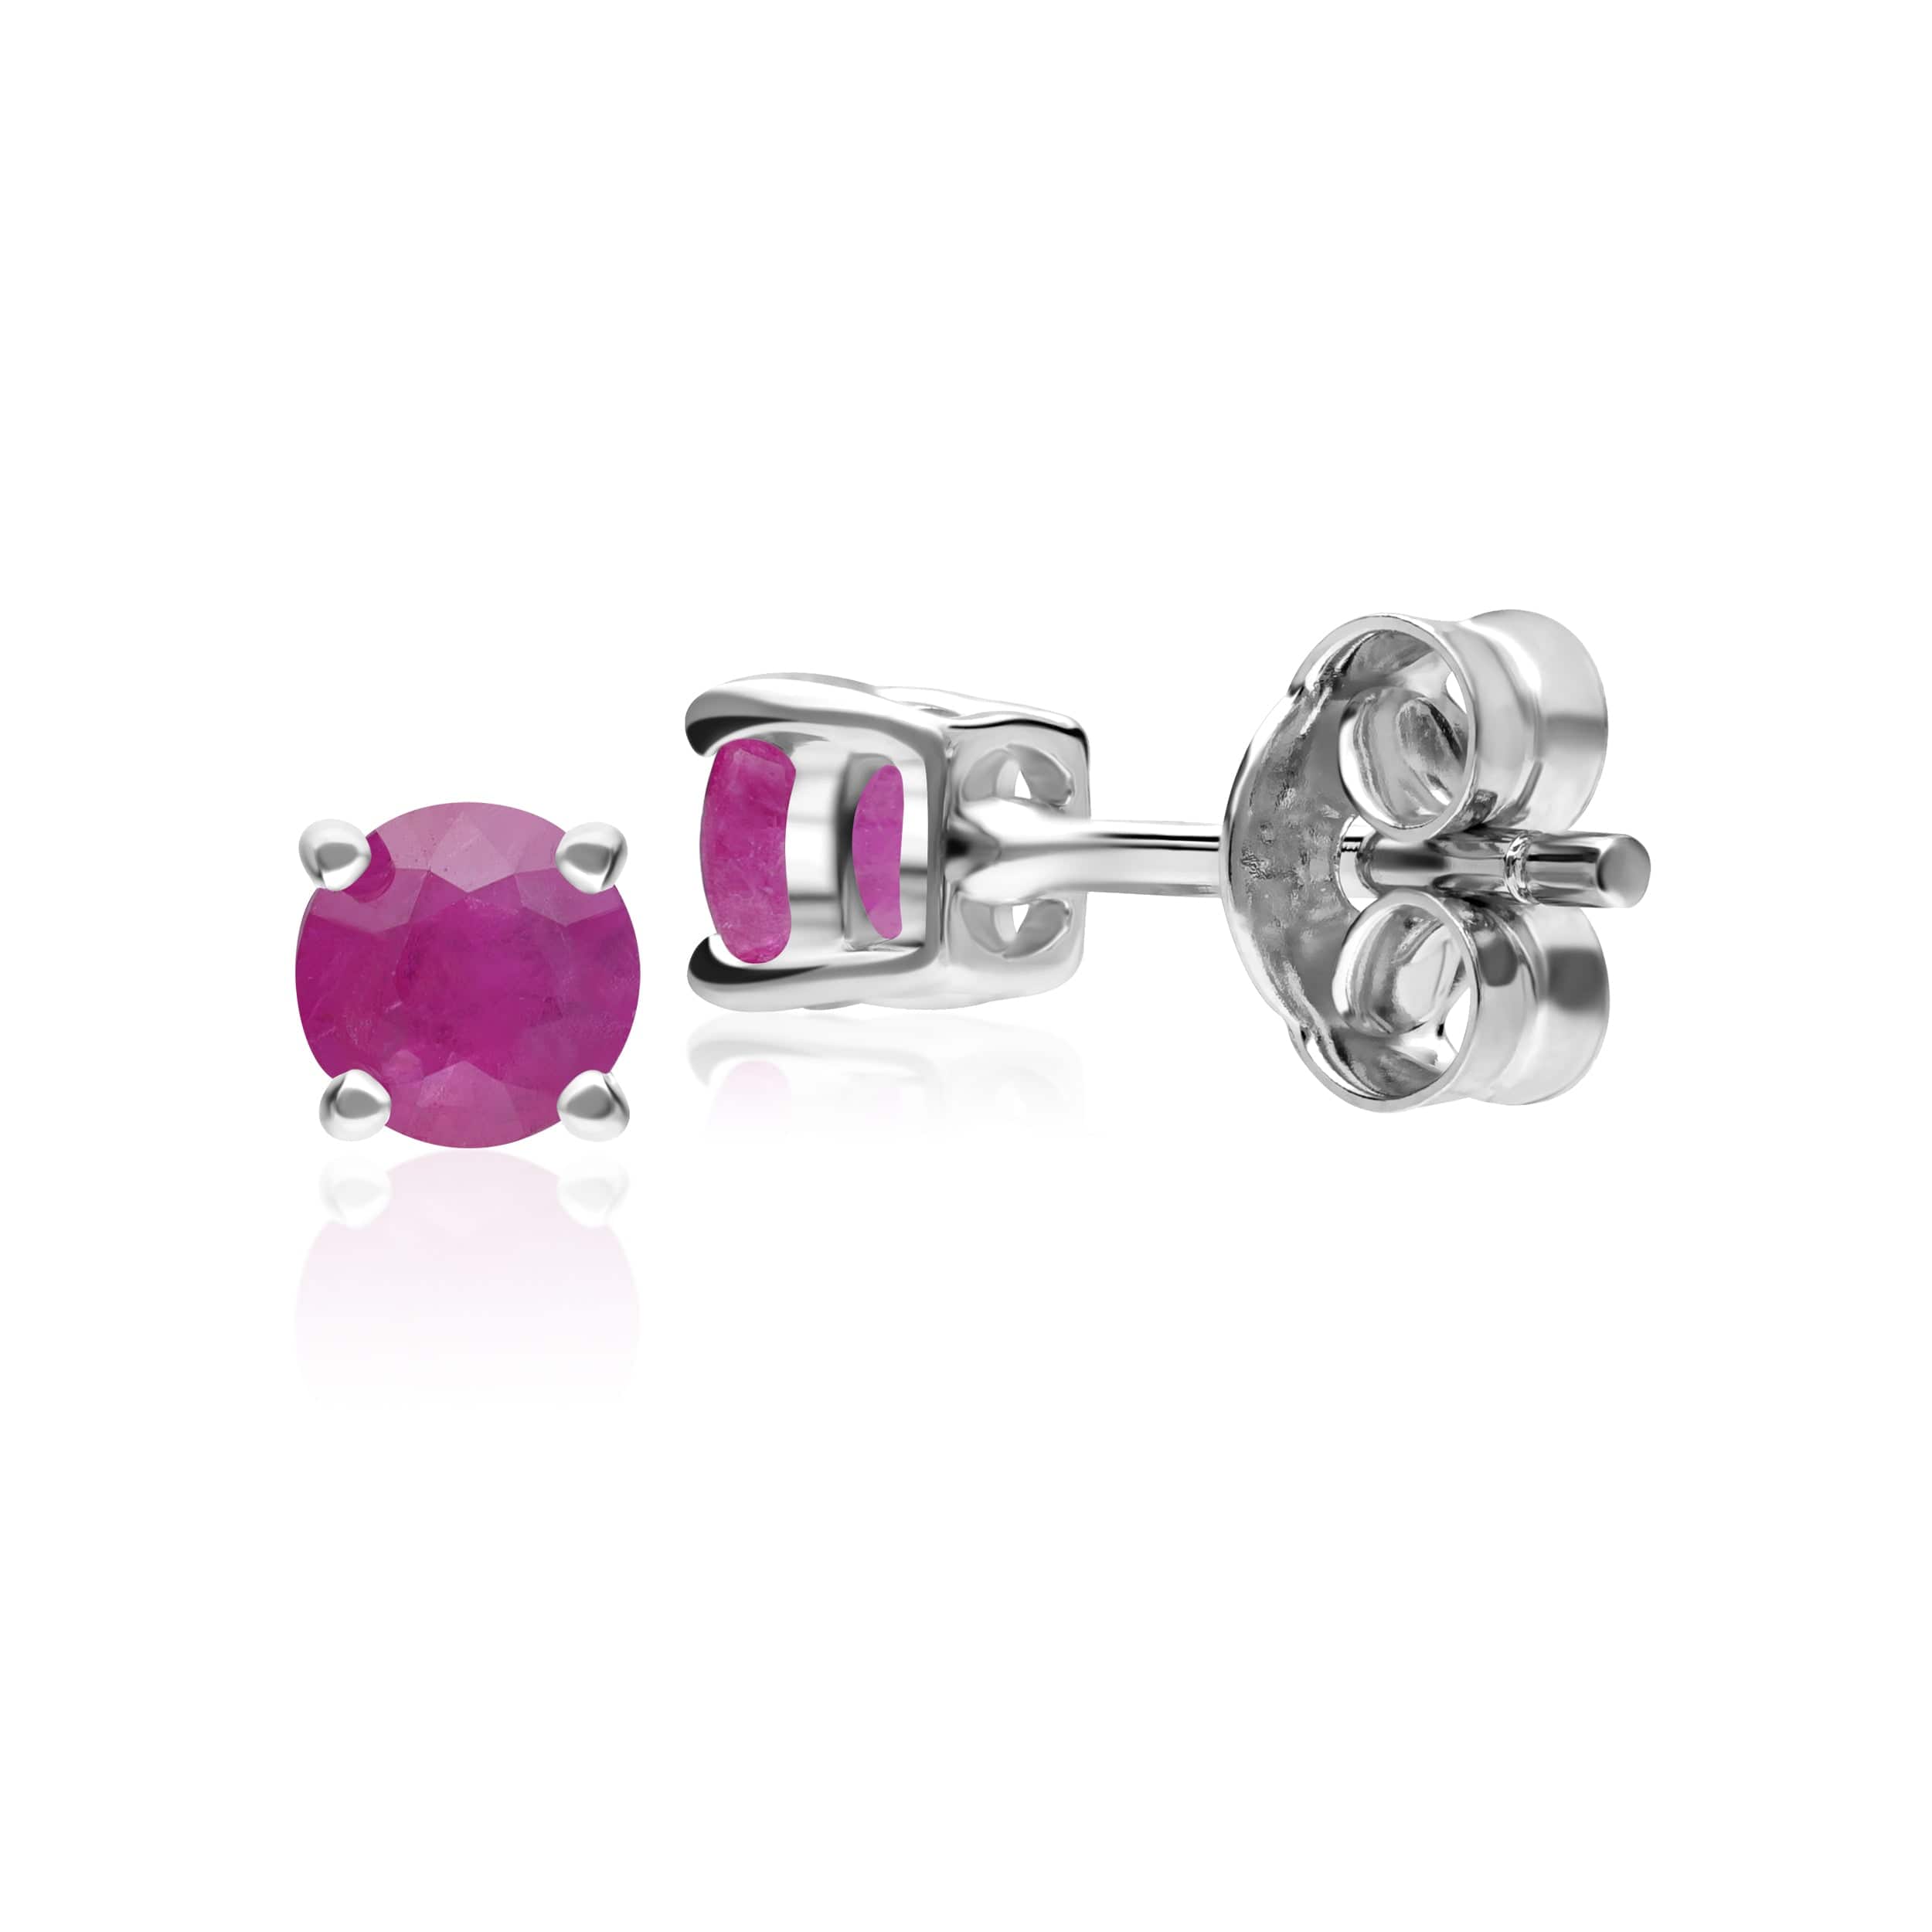 11622 Classic Round Ruby Stud Earrings in 9ct White Gold 2